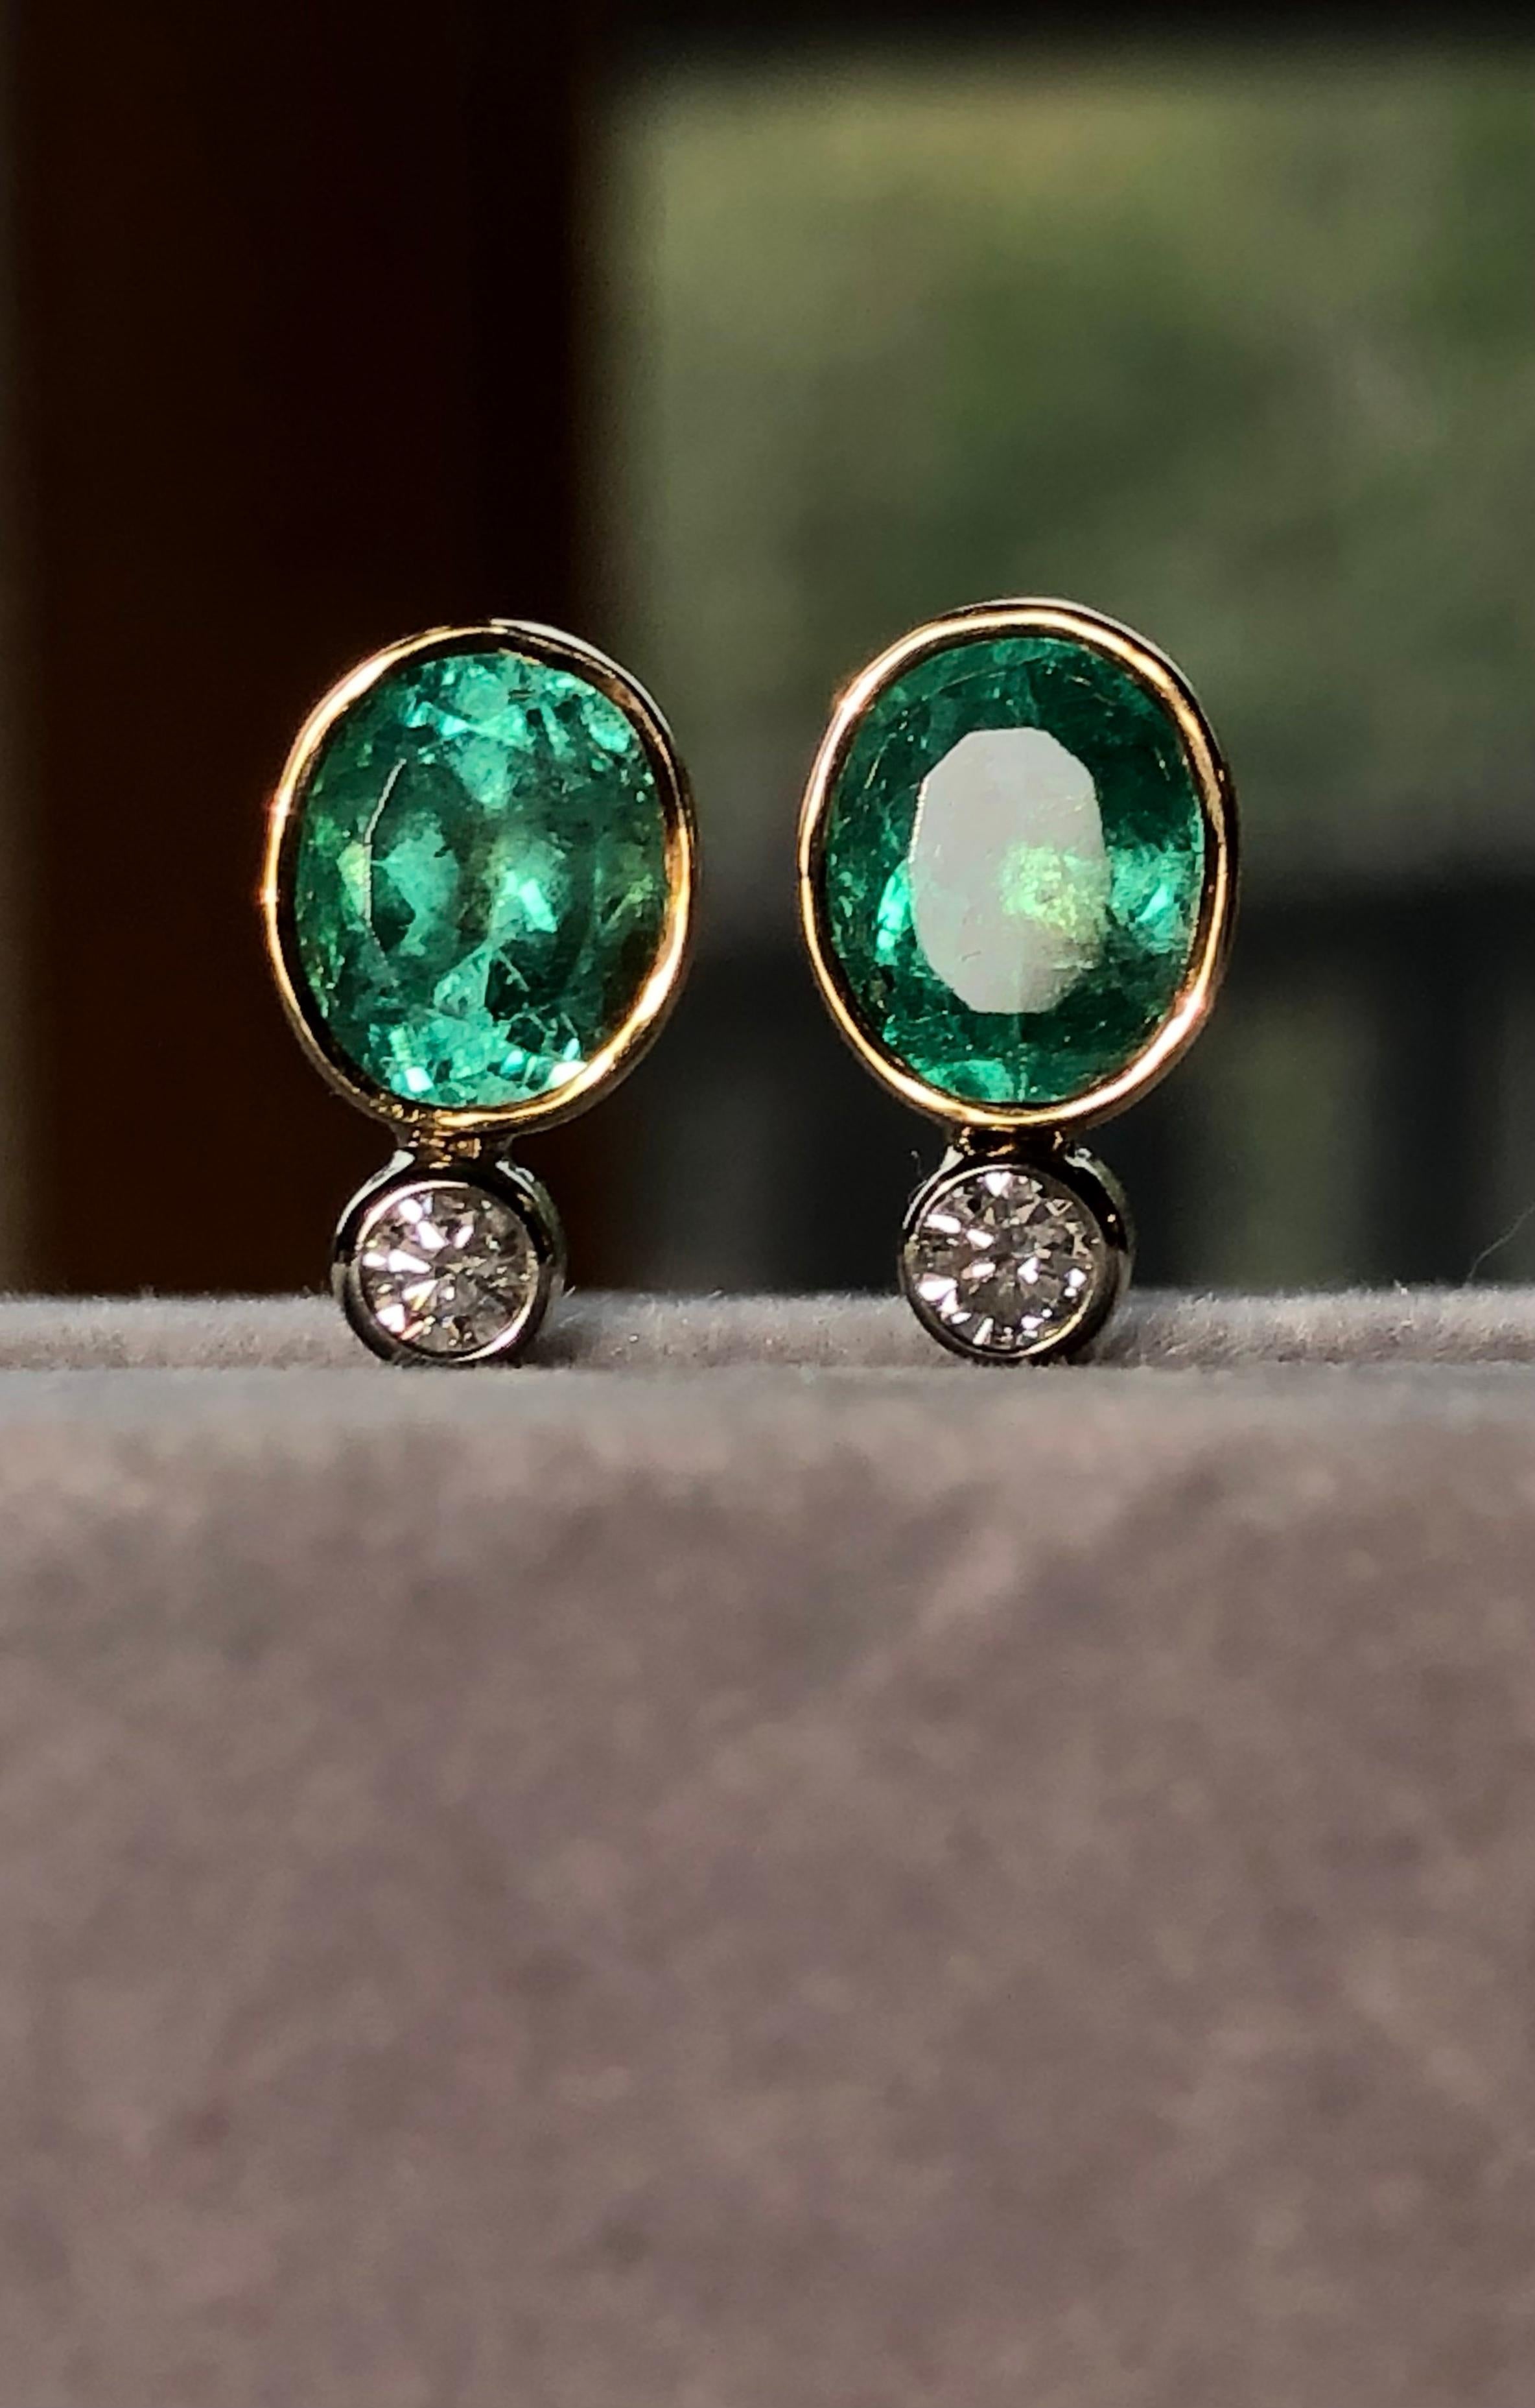 2.54 Carat Natural Colombian Emerald Diamond Stud Earrings 18k 
Primary Stones: 100% Natural Colombian Emeralds
Shape or Cut : Oval Cut
Average Color/Clarity : Beautiful Medium Green/ Clarity, VS
Total Weight Emeralds: Approx. 2.30 Carats (2